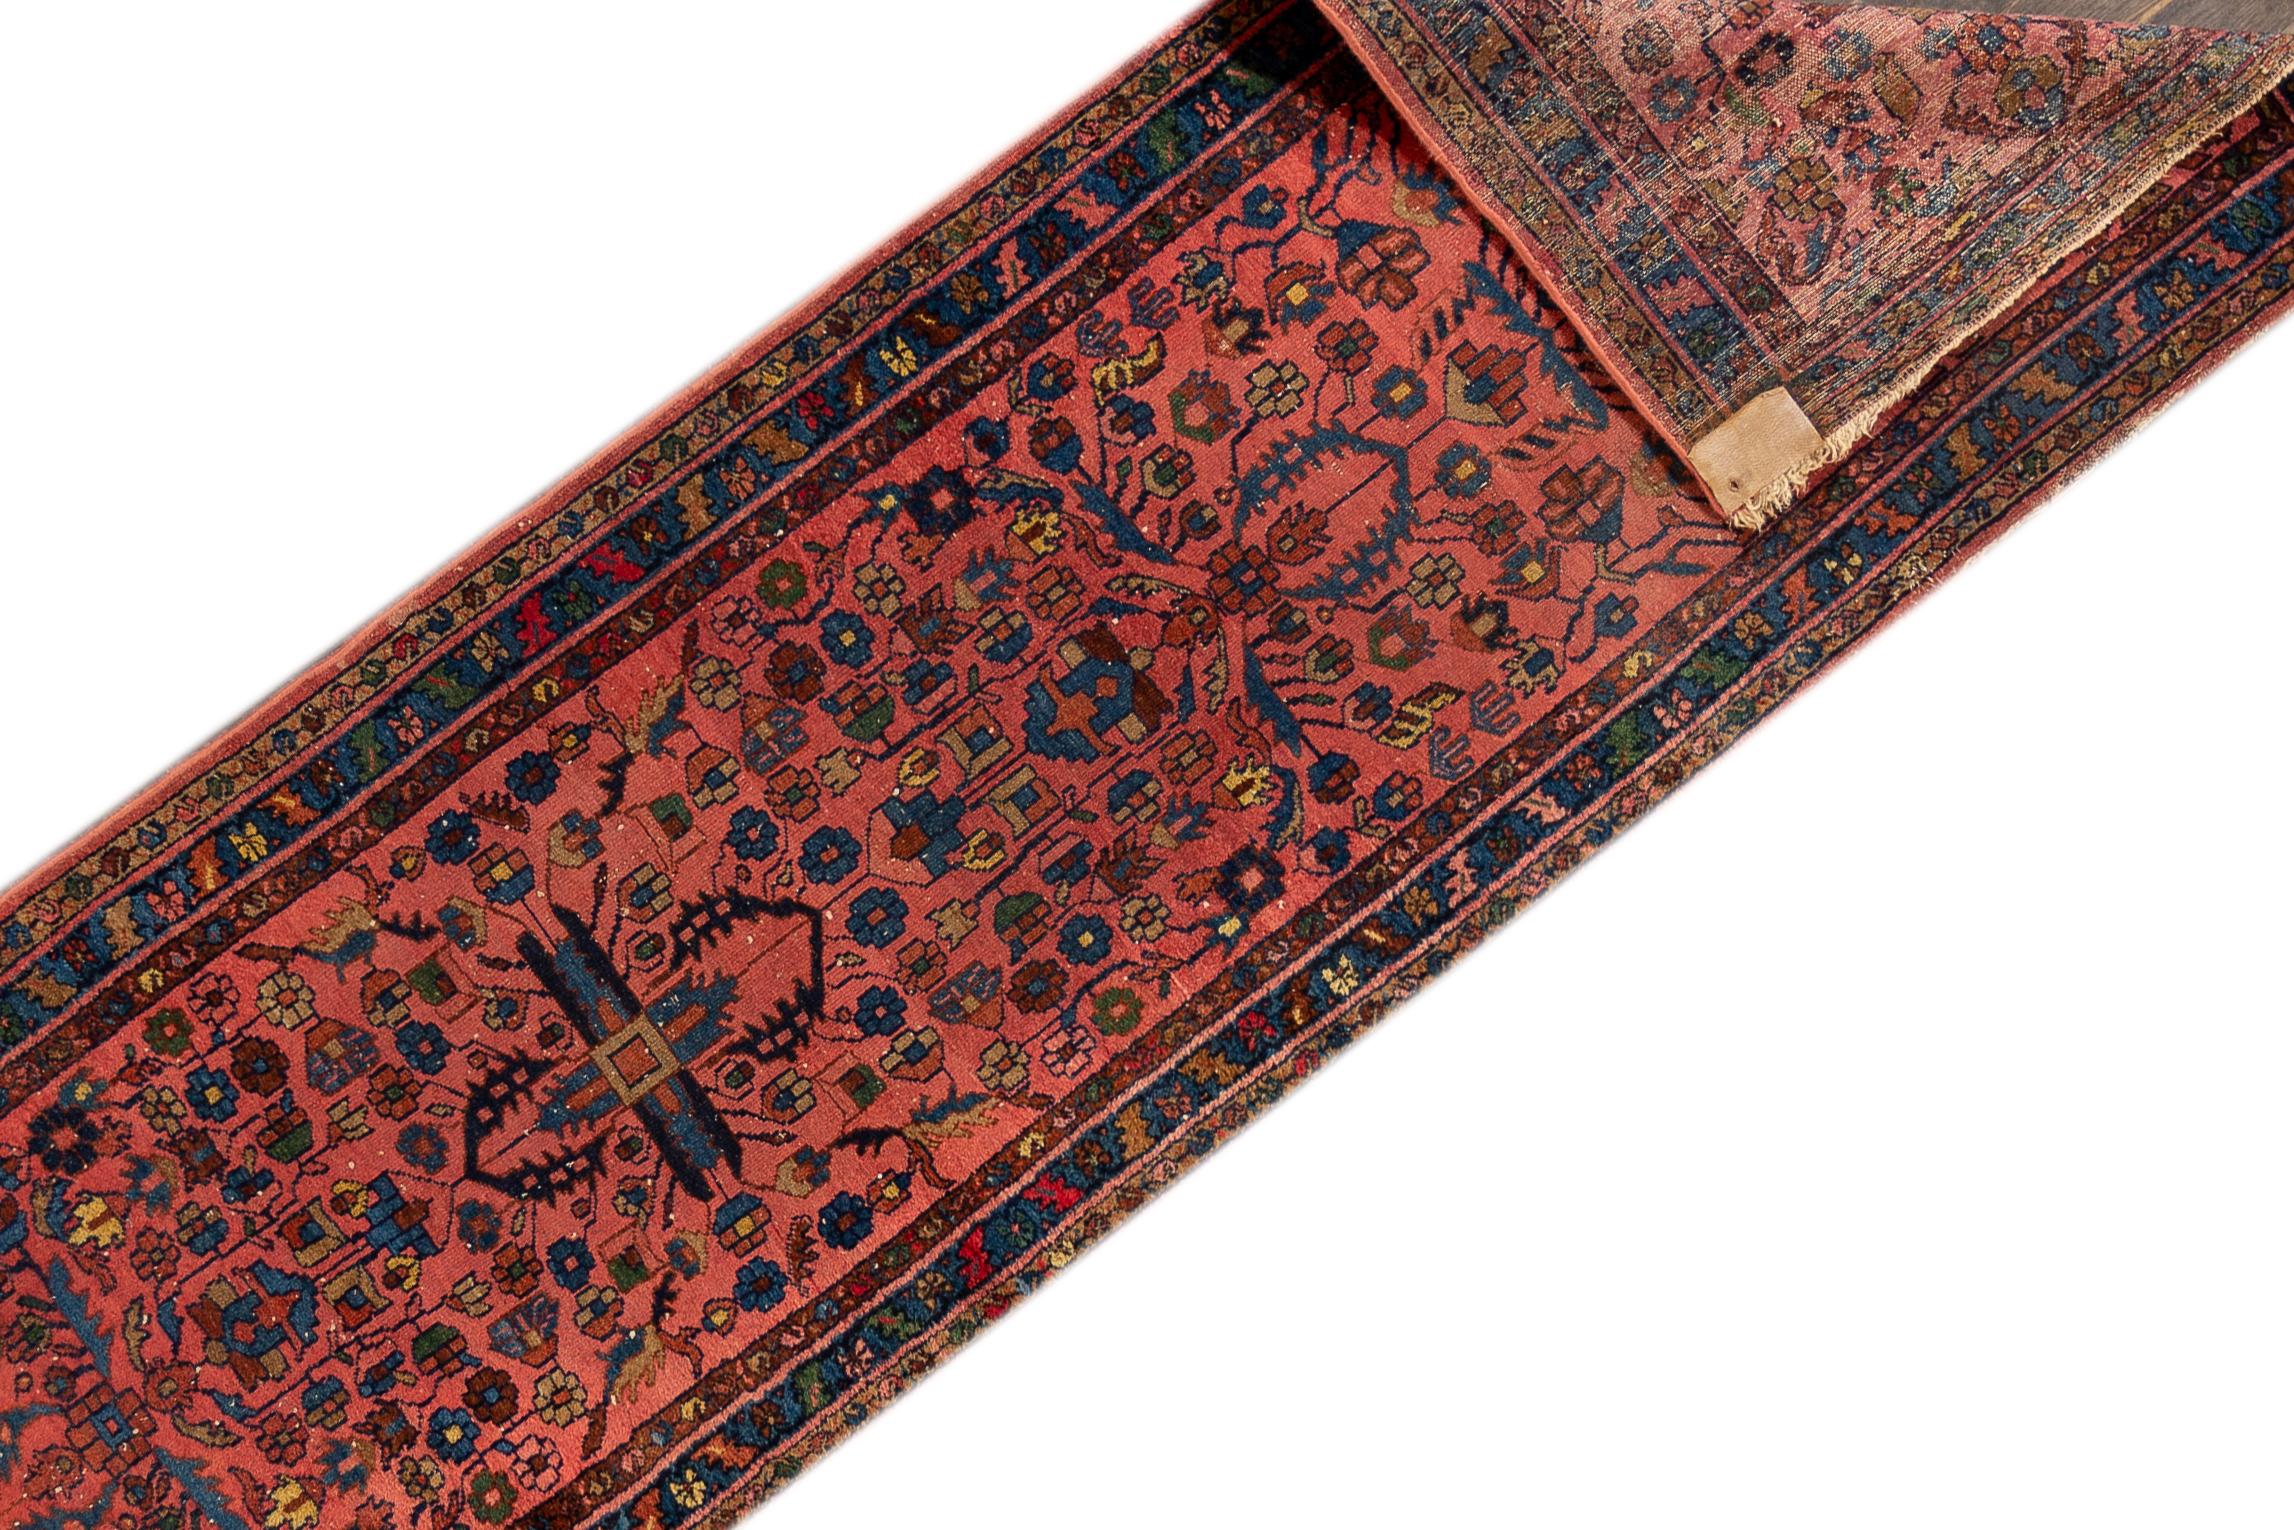 A 20th century antique Lillihan rug with an all-over pink motif. This rug measures at 2'7